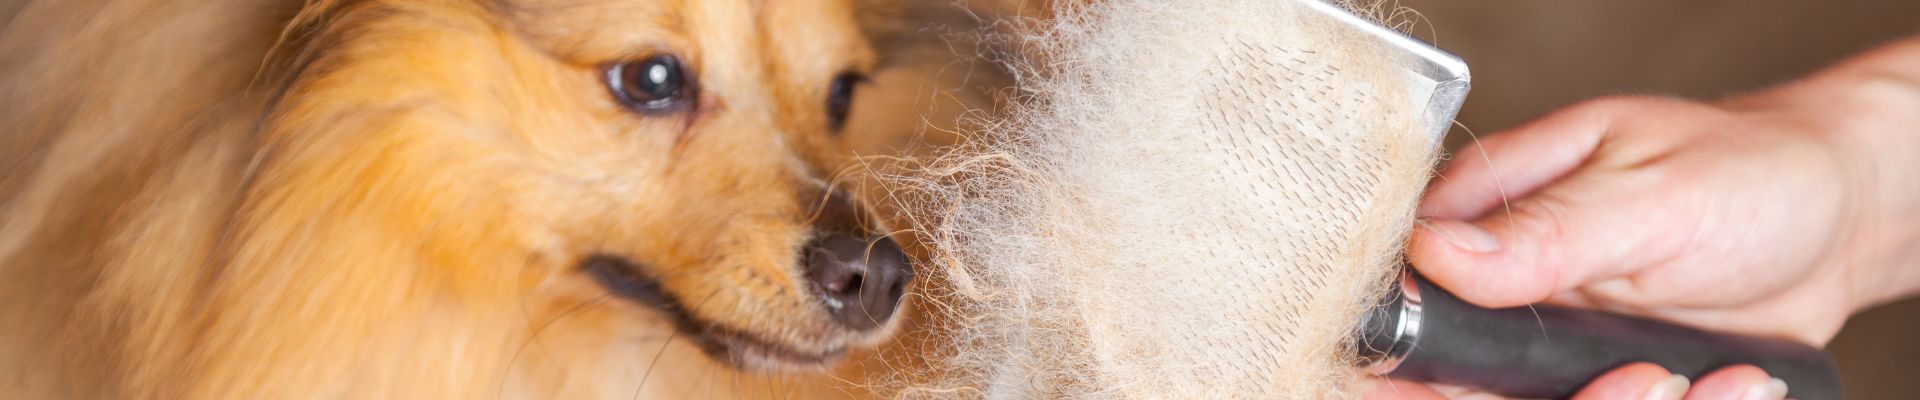 A fluffy dog next to a dog brush covered in dog hair